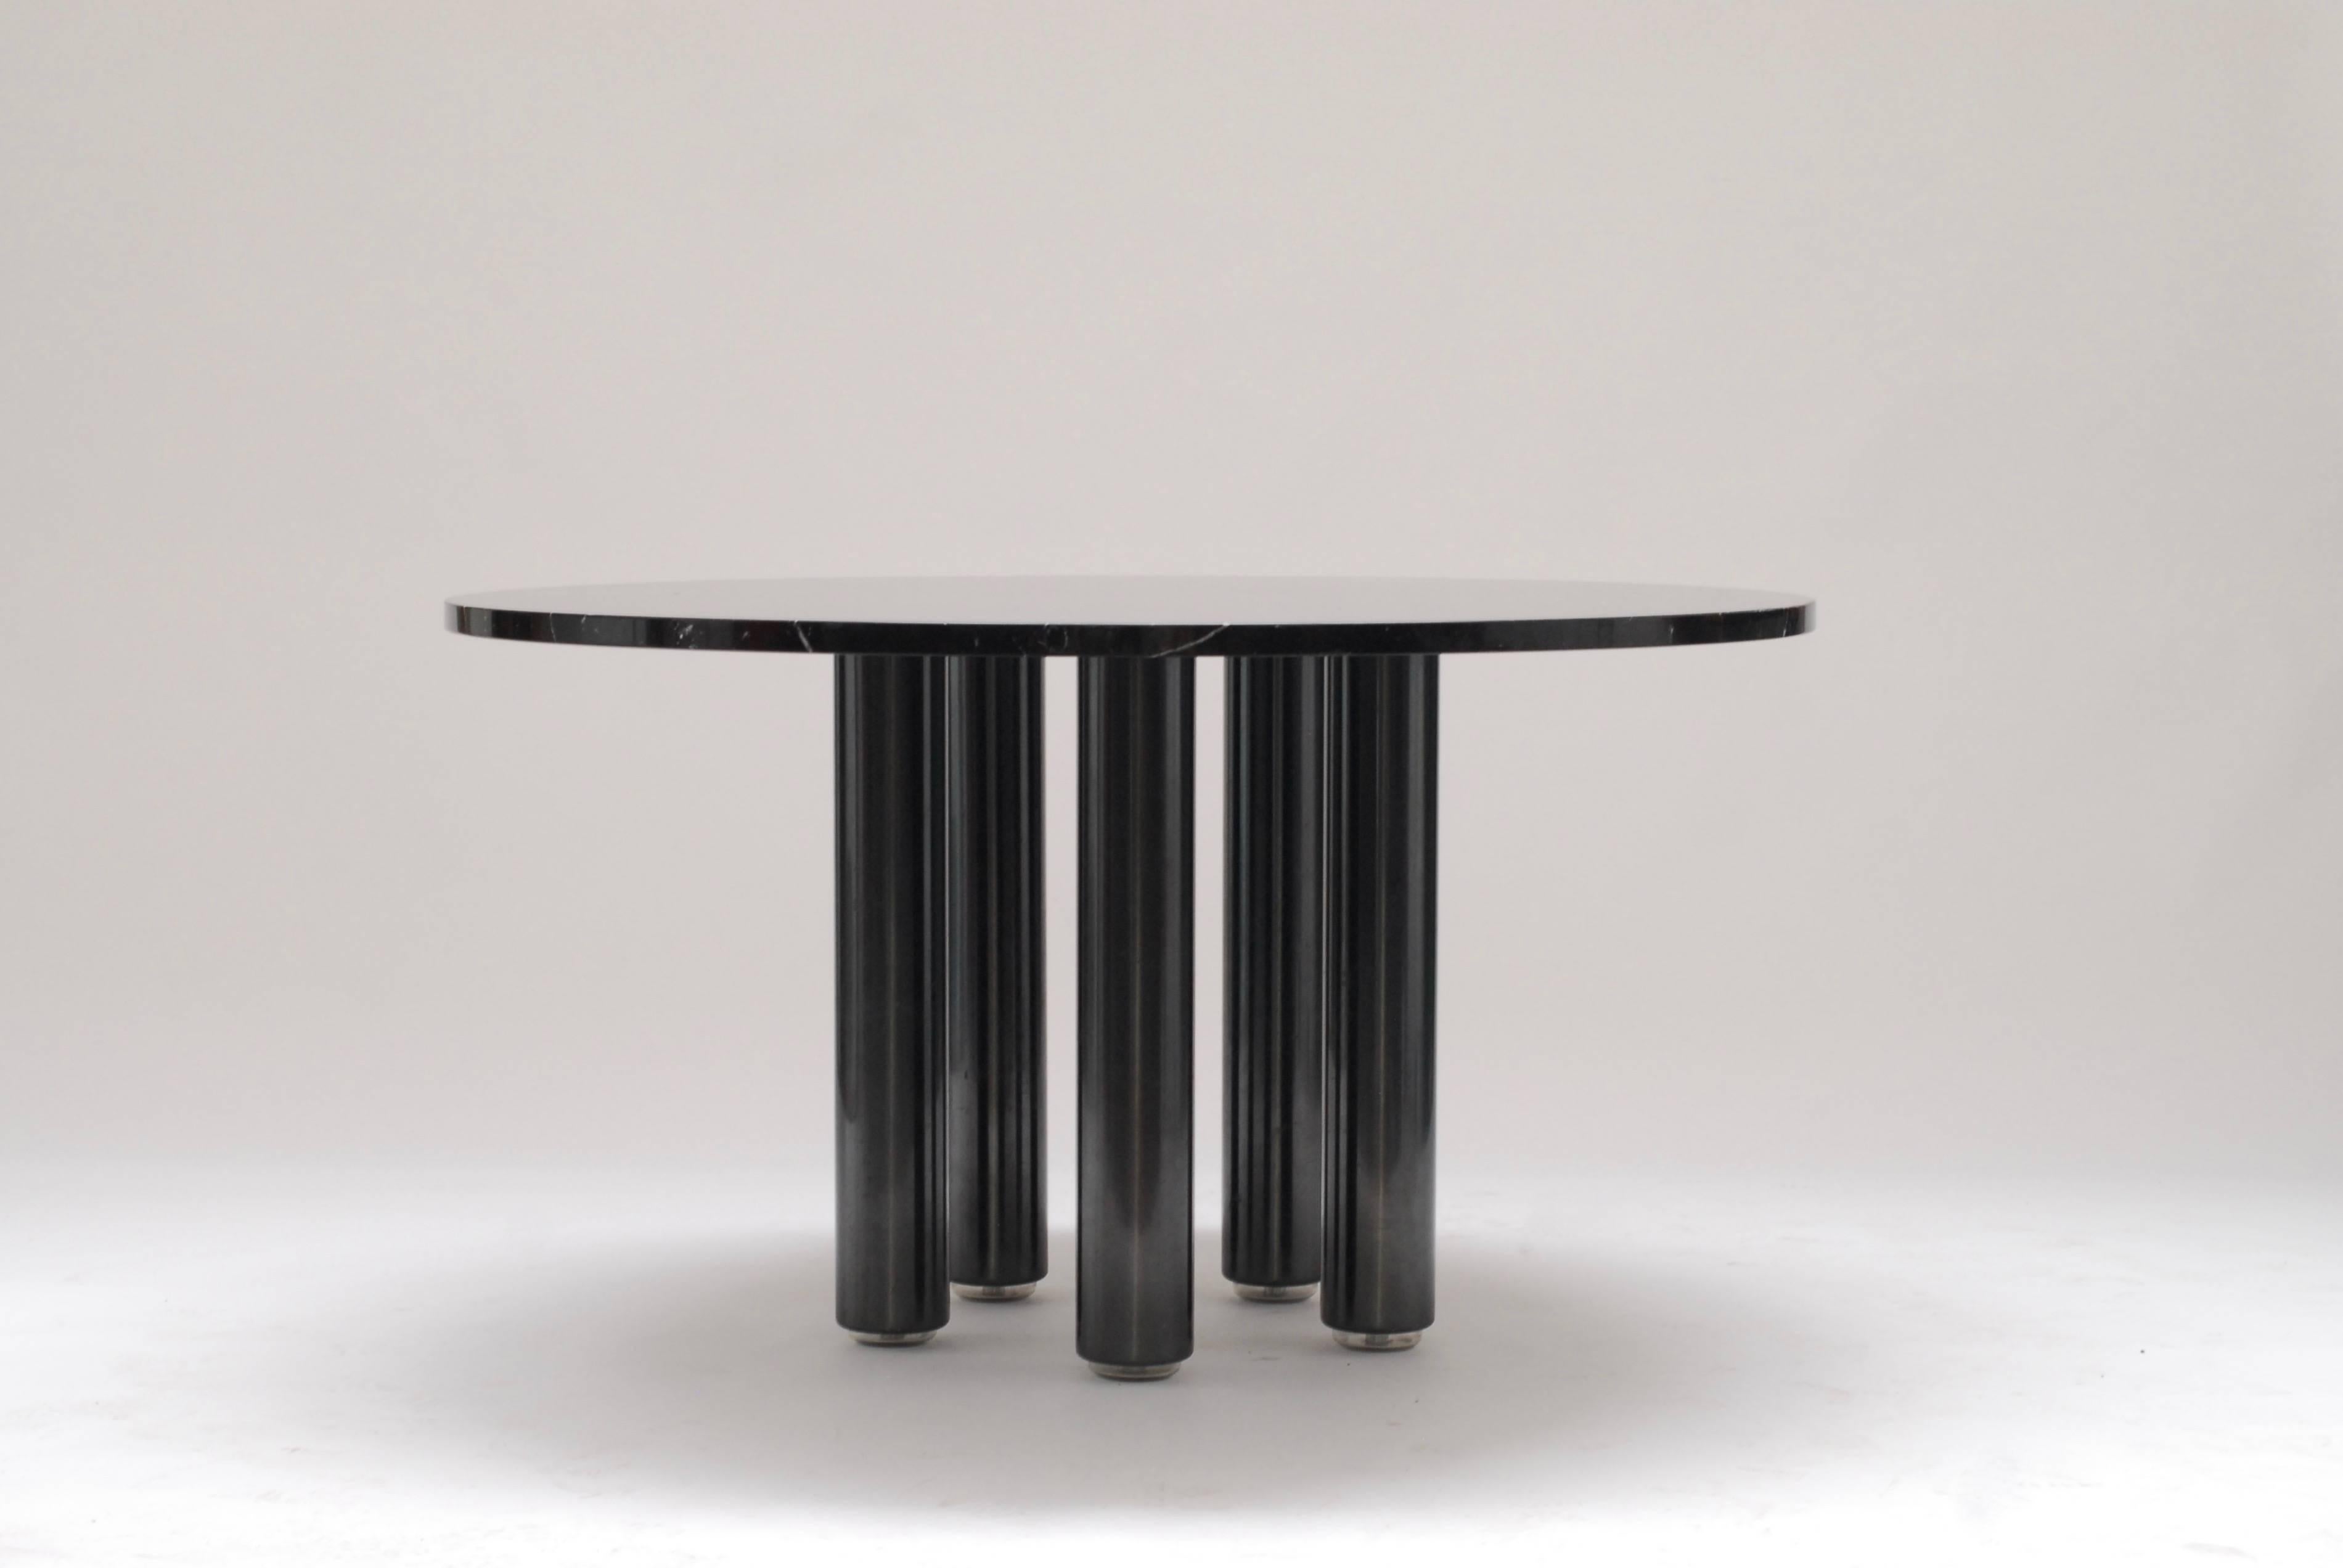 Rather rare dining table designed by Marco Zanuso for Zanotta in 1979. A black marble base resting on five metal legs which are adjustable in height.
Great combination of formal approach in material and color on one hand and playfulness in the